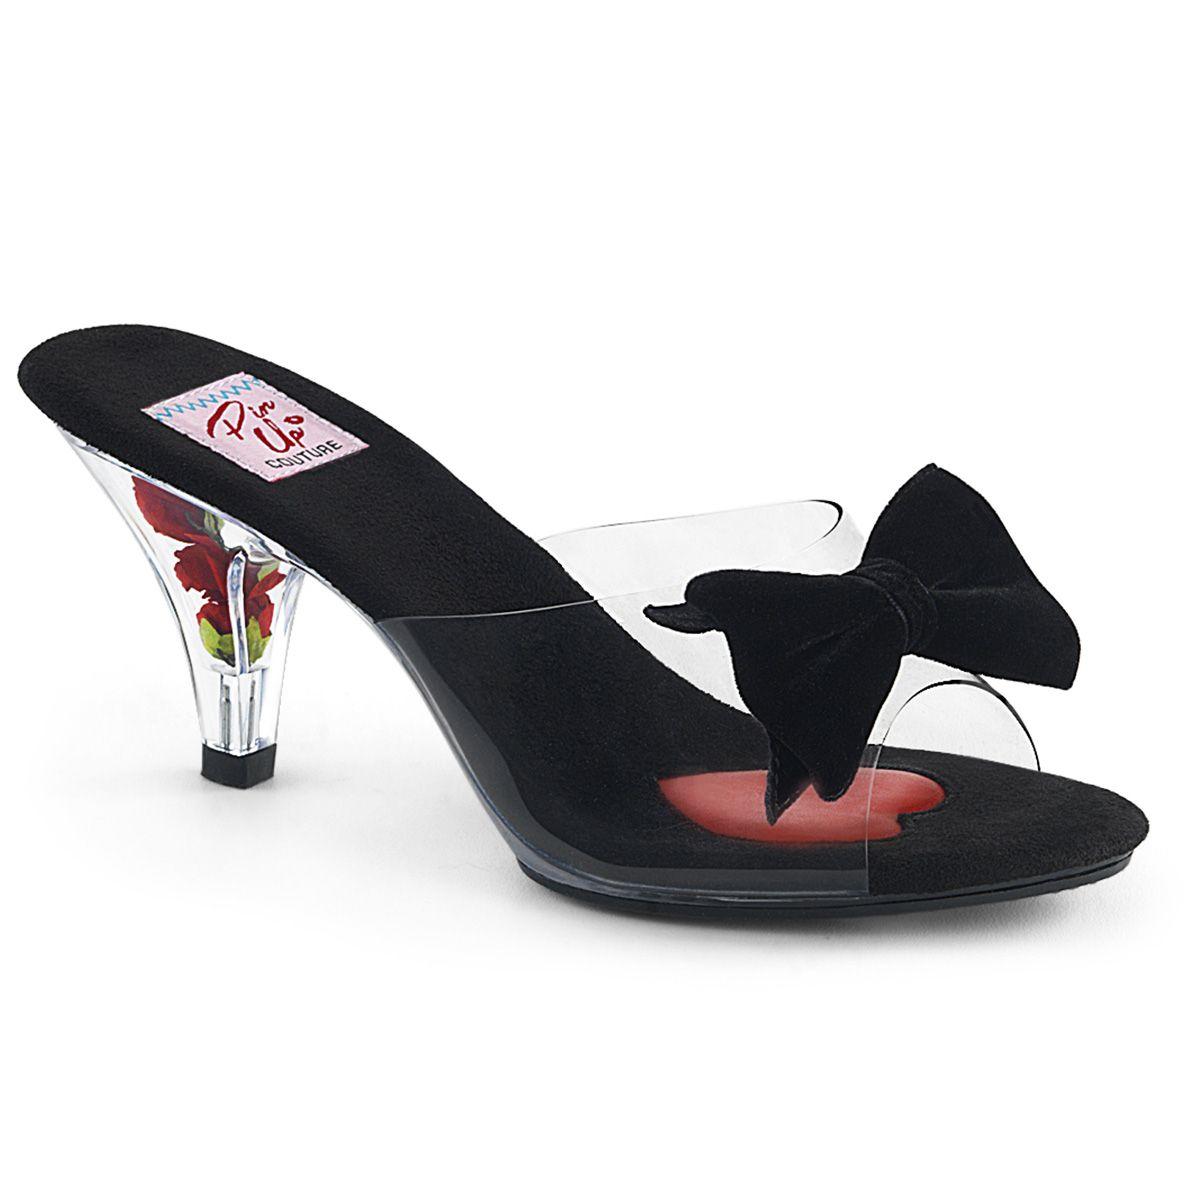 Open Toe Slipper with rose in the heel